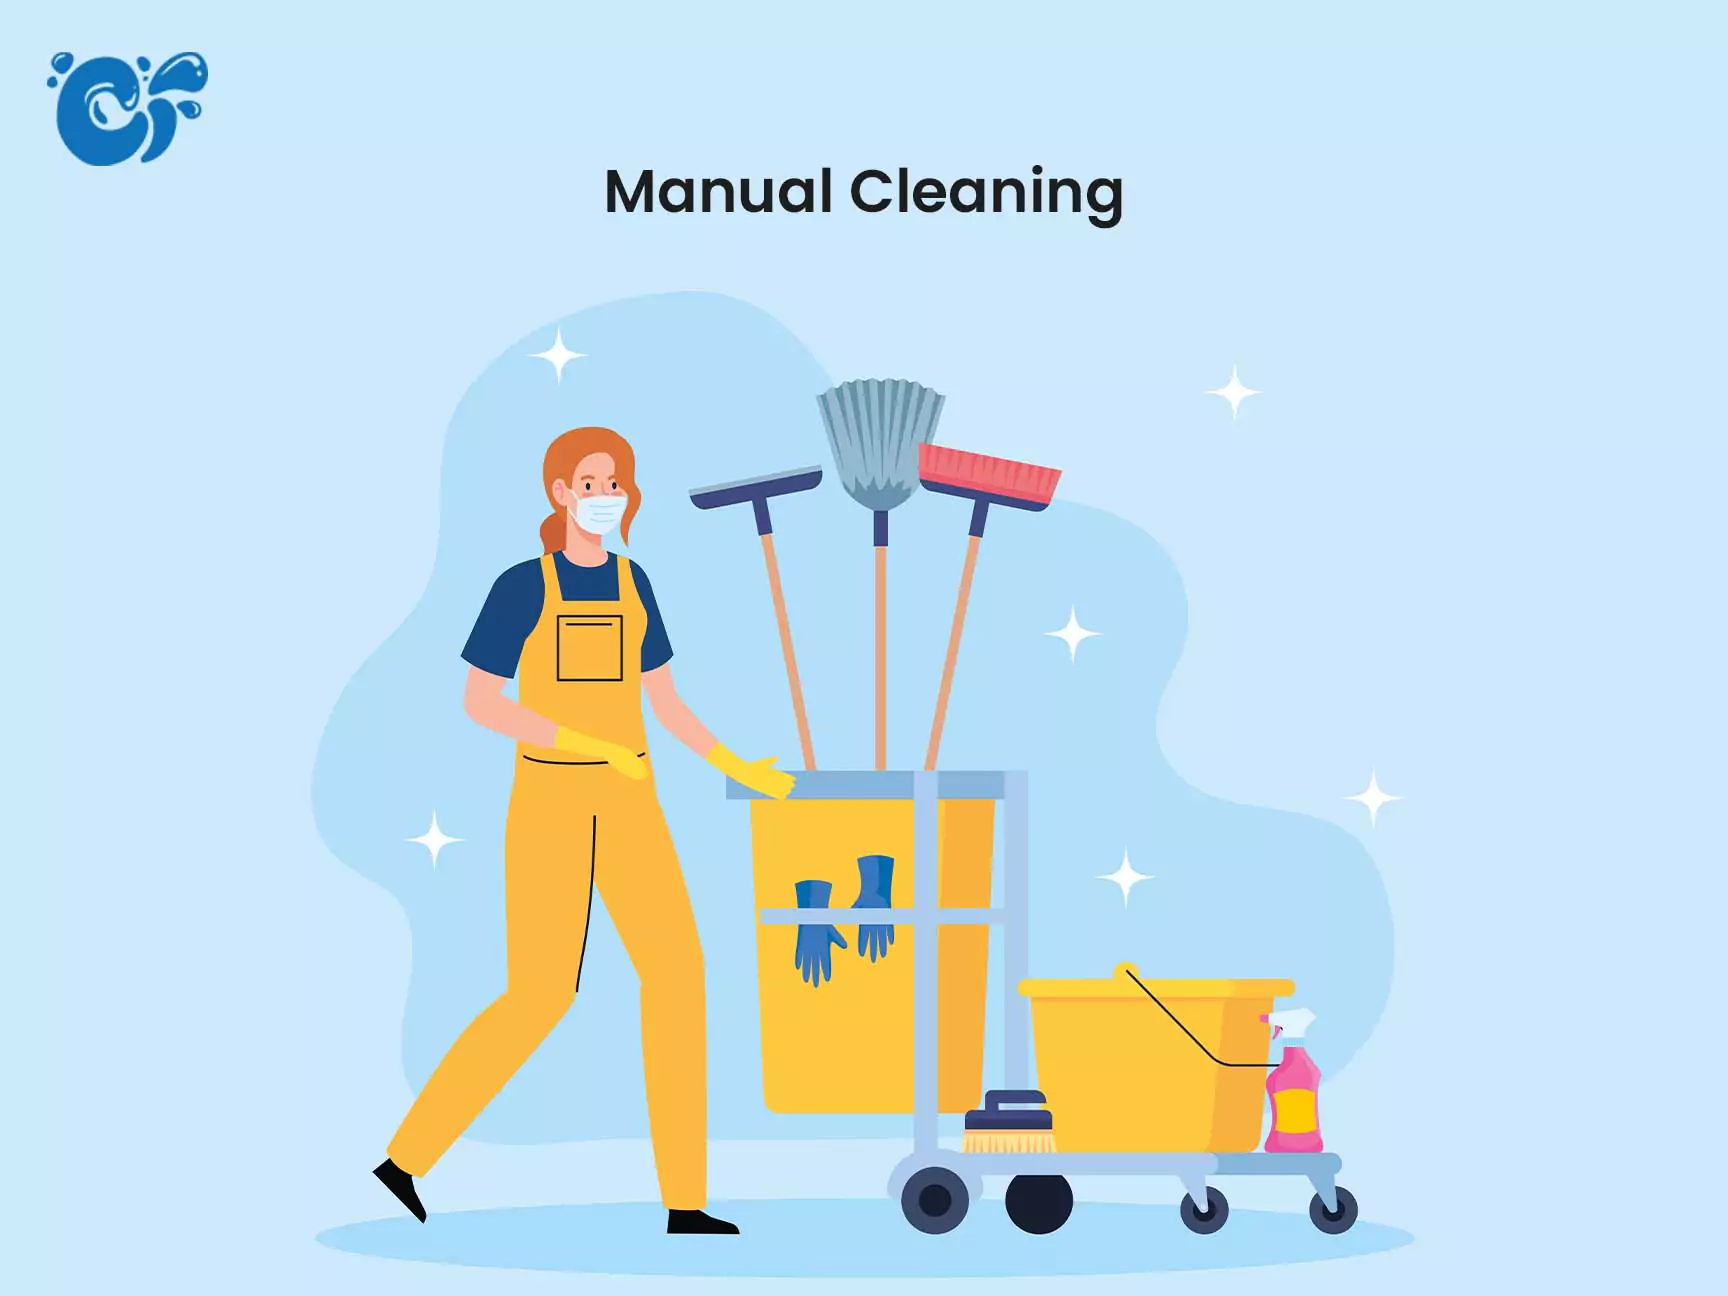 Manual Cleaning